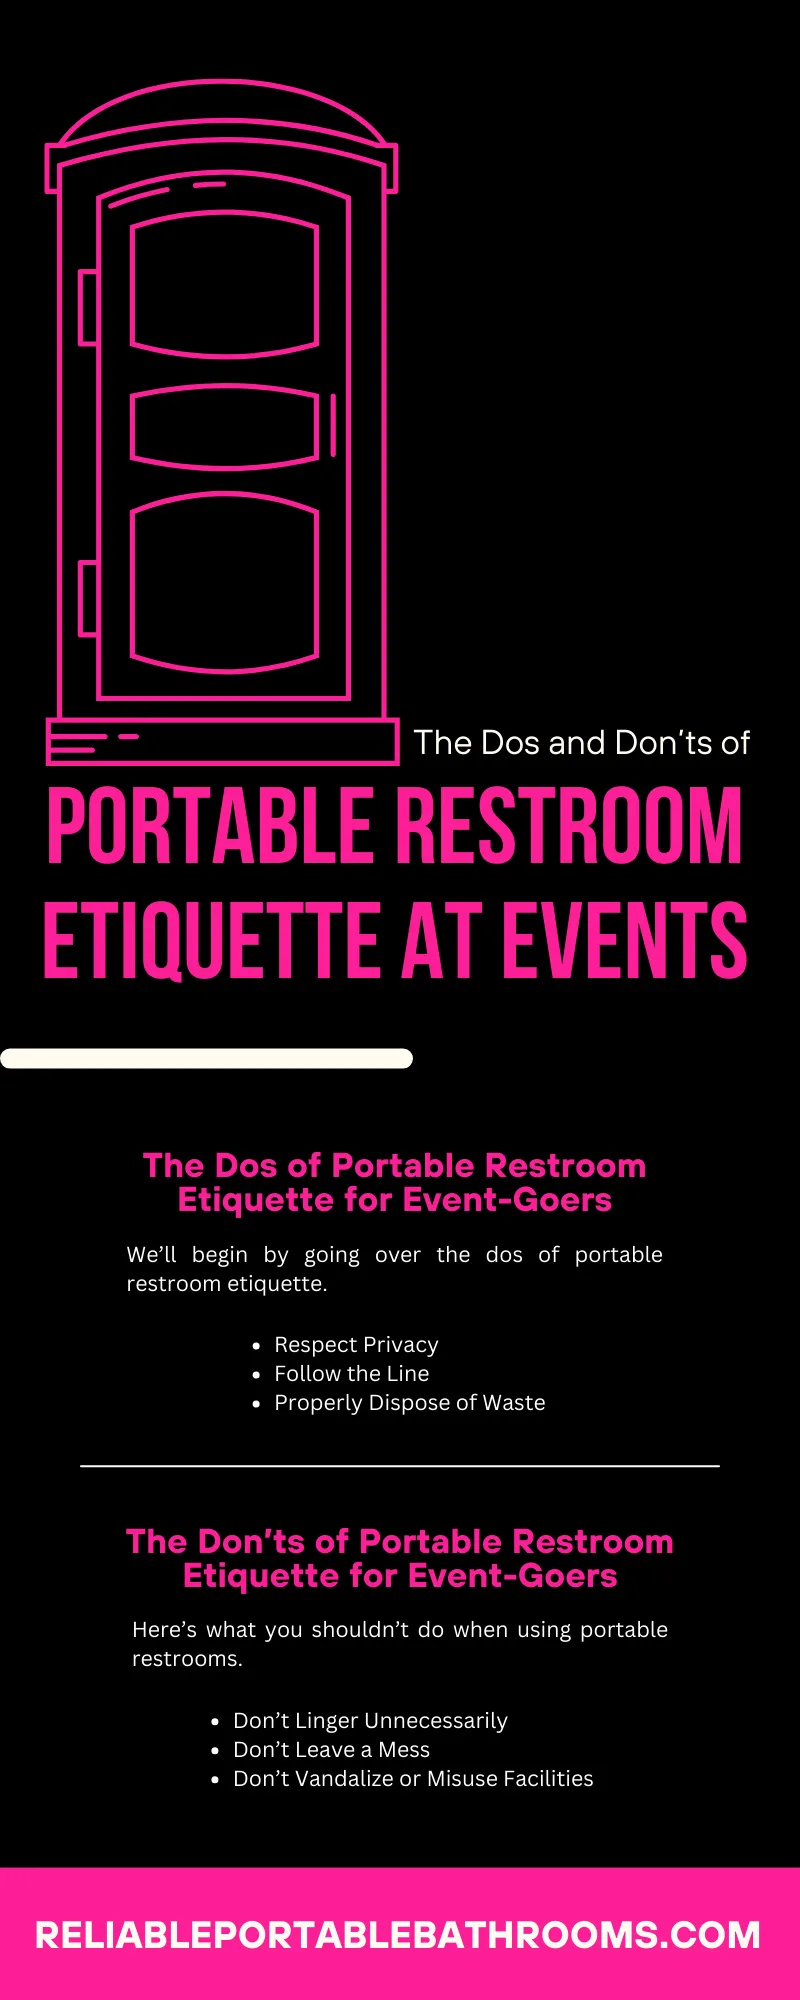 The Dos and Don’ts of Portable Restroom Etiquette at Events